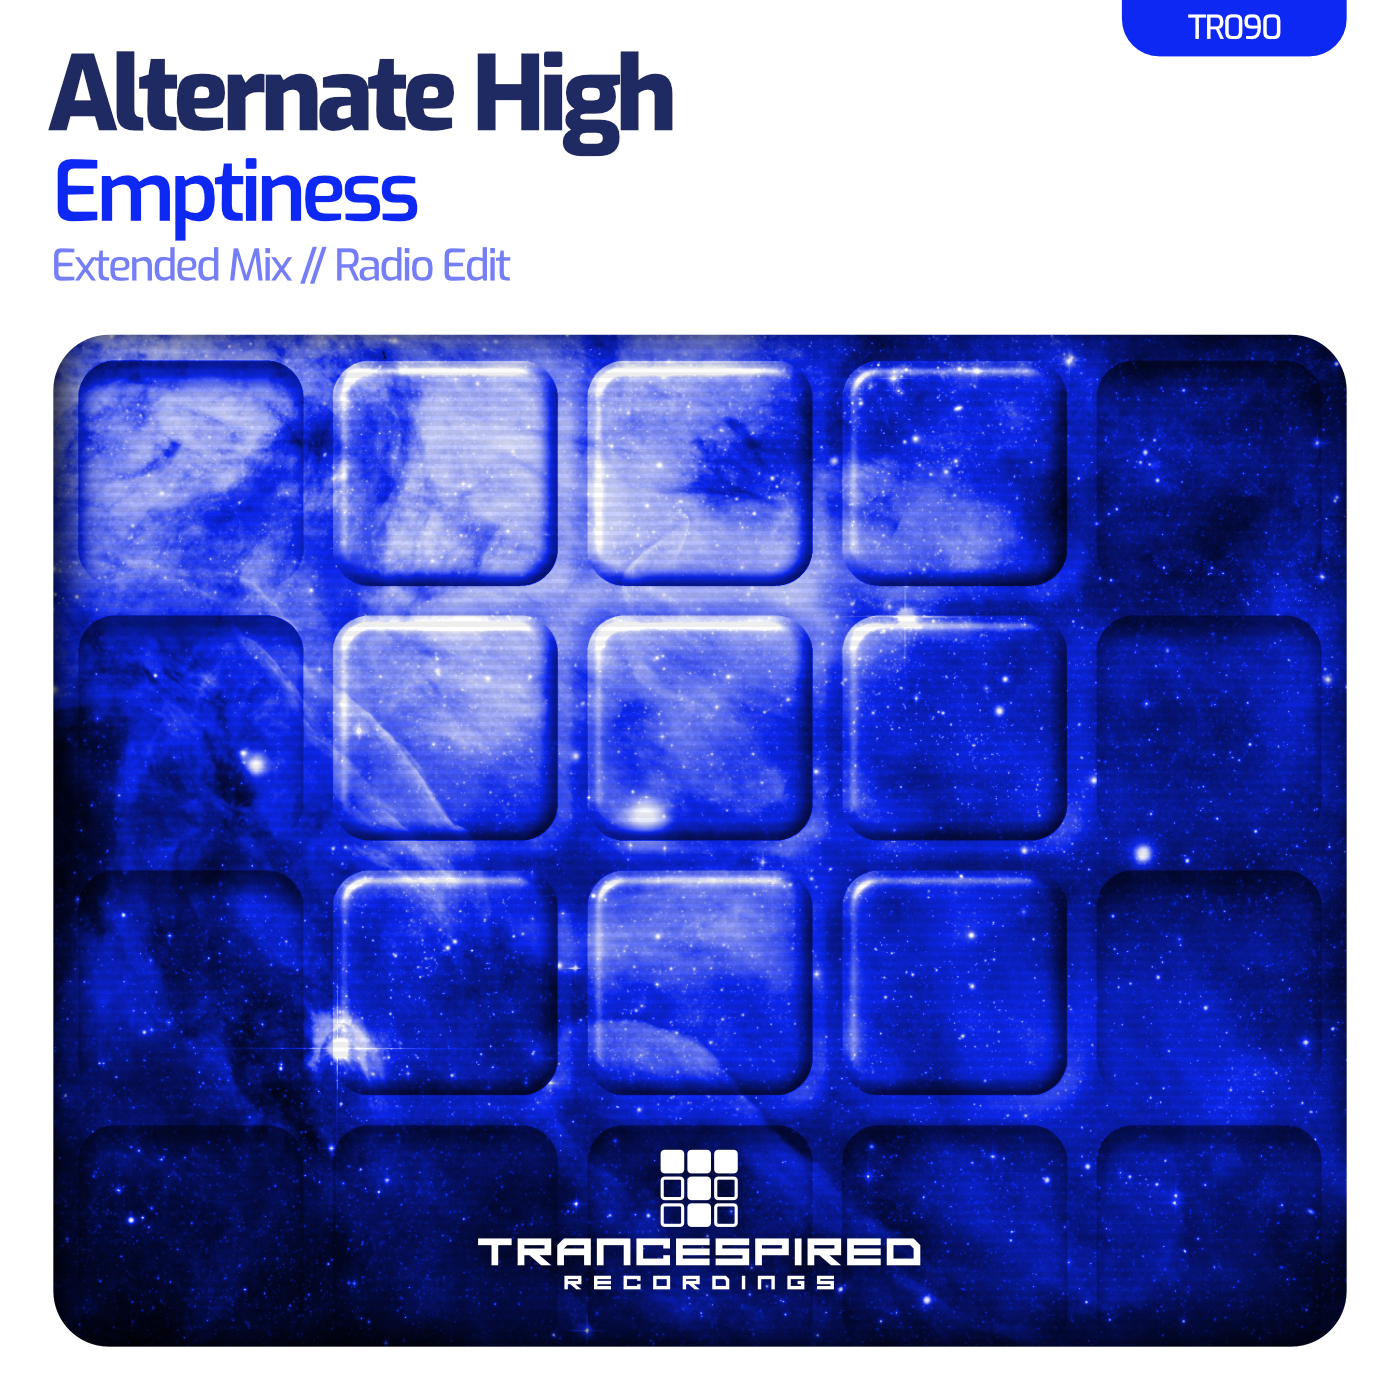 Alternate High presents Emptiness on Trancespired Recordings